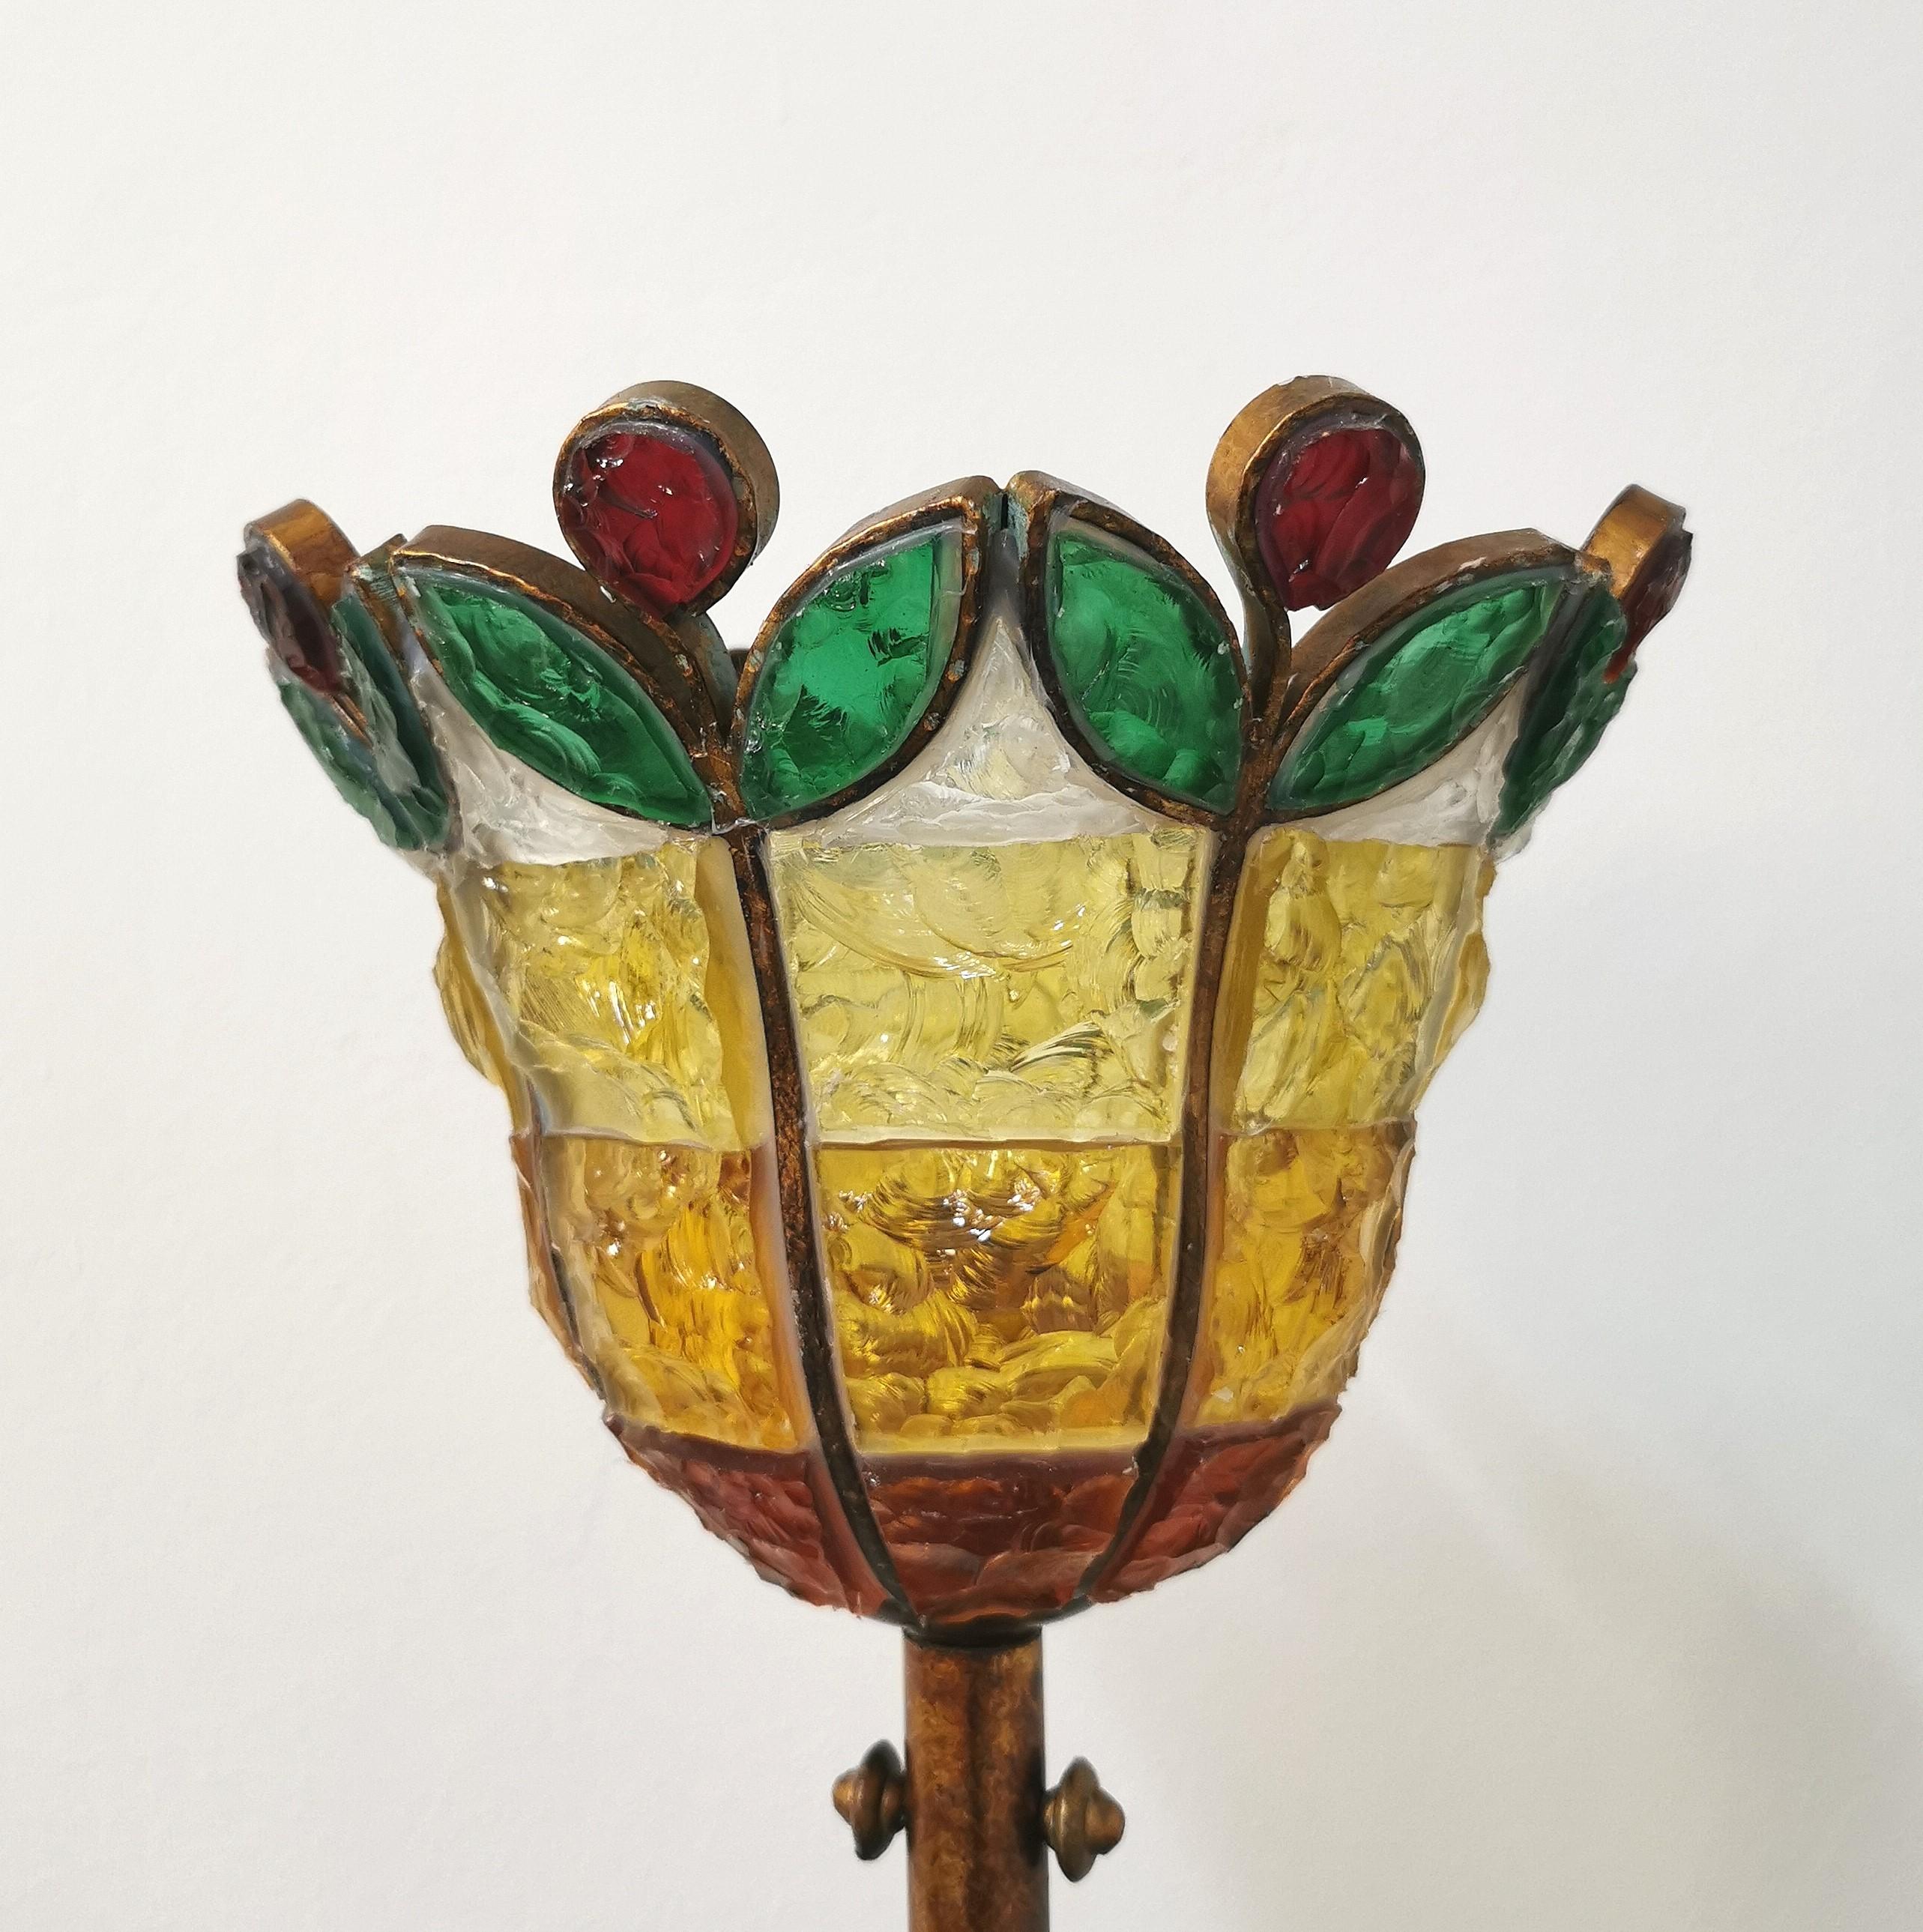 Floor lamp produced in Italy in the 70s by the Italian company Poliarte. The lamp has a circular base and a long stem in bronzed metal with a hammered glass diffuser in shades of yellow, green, red and transparent.